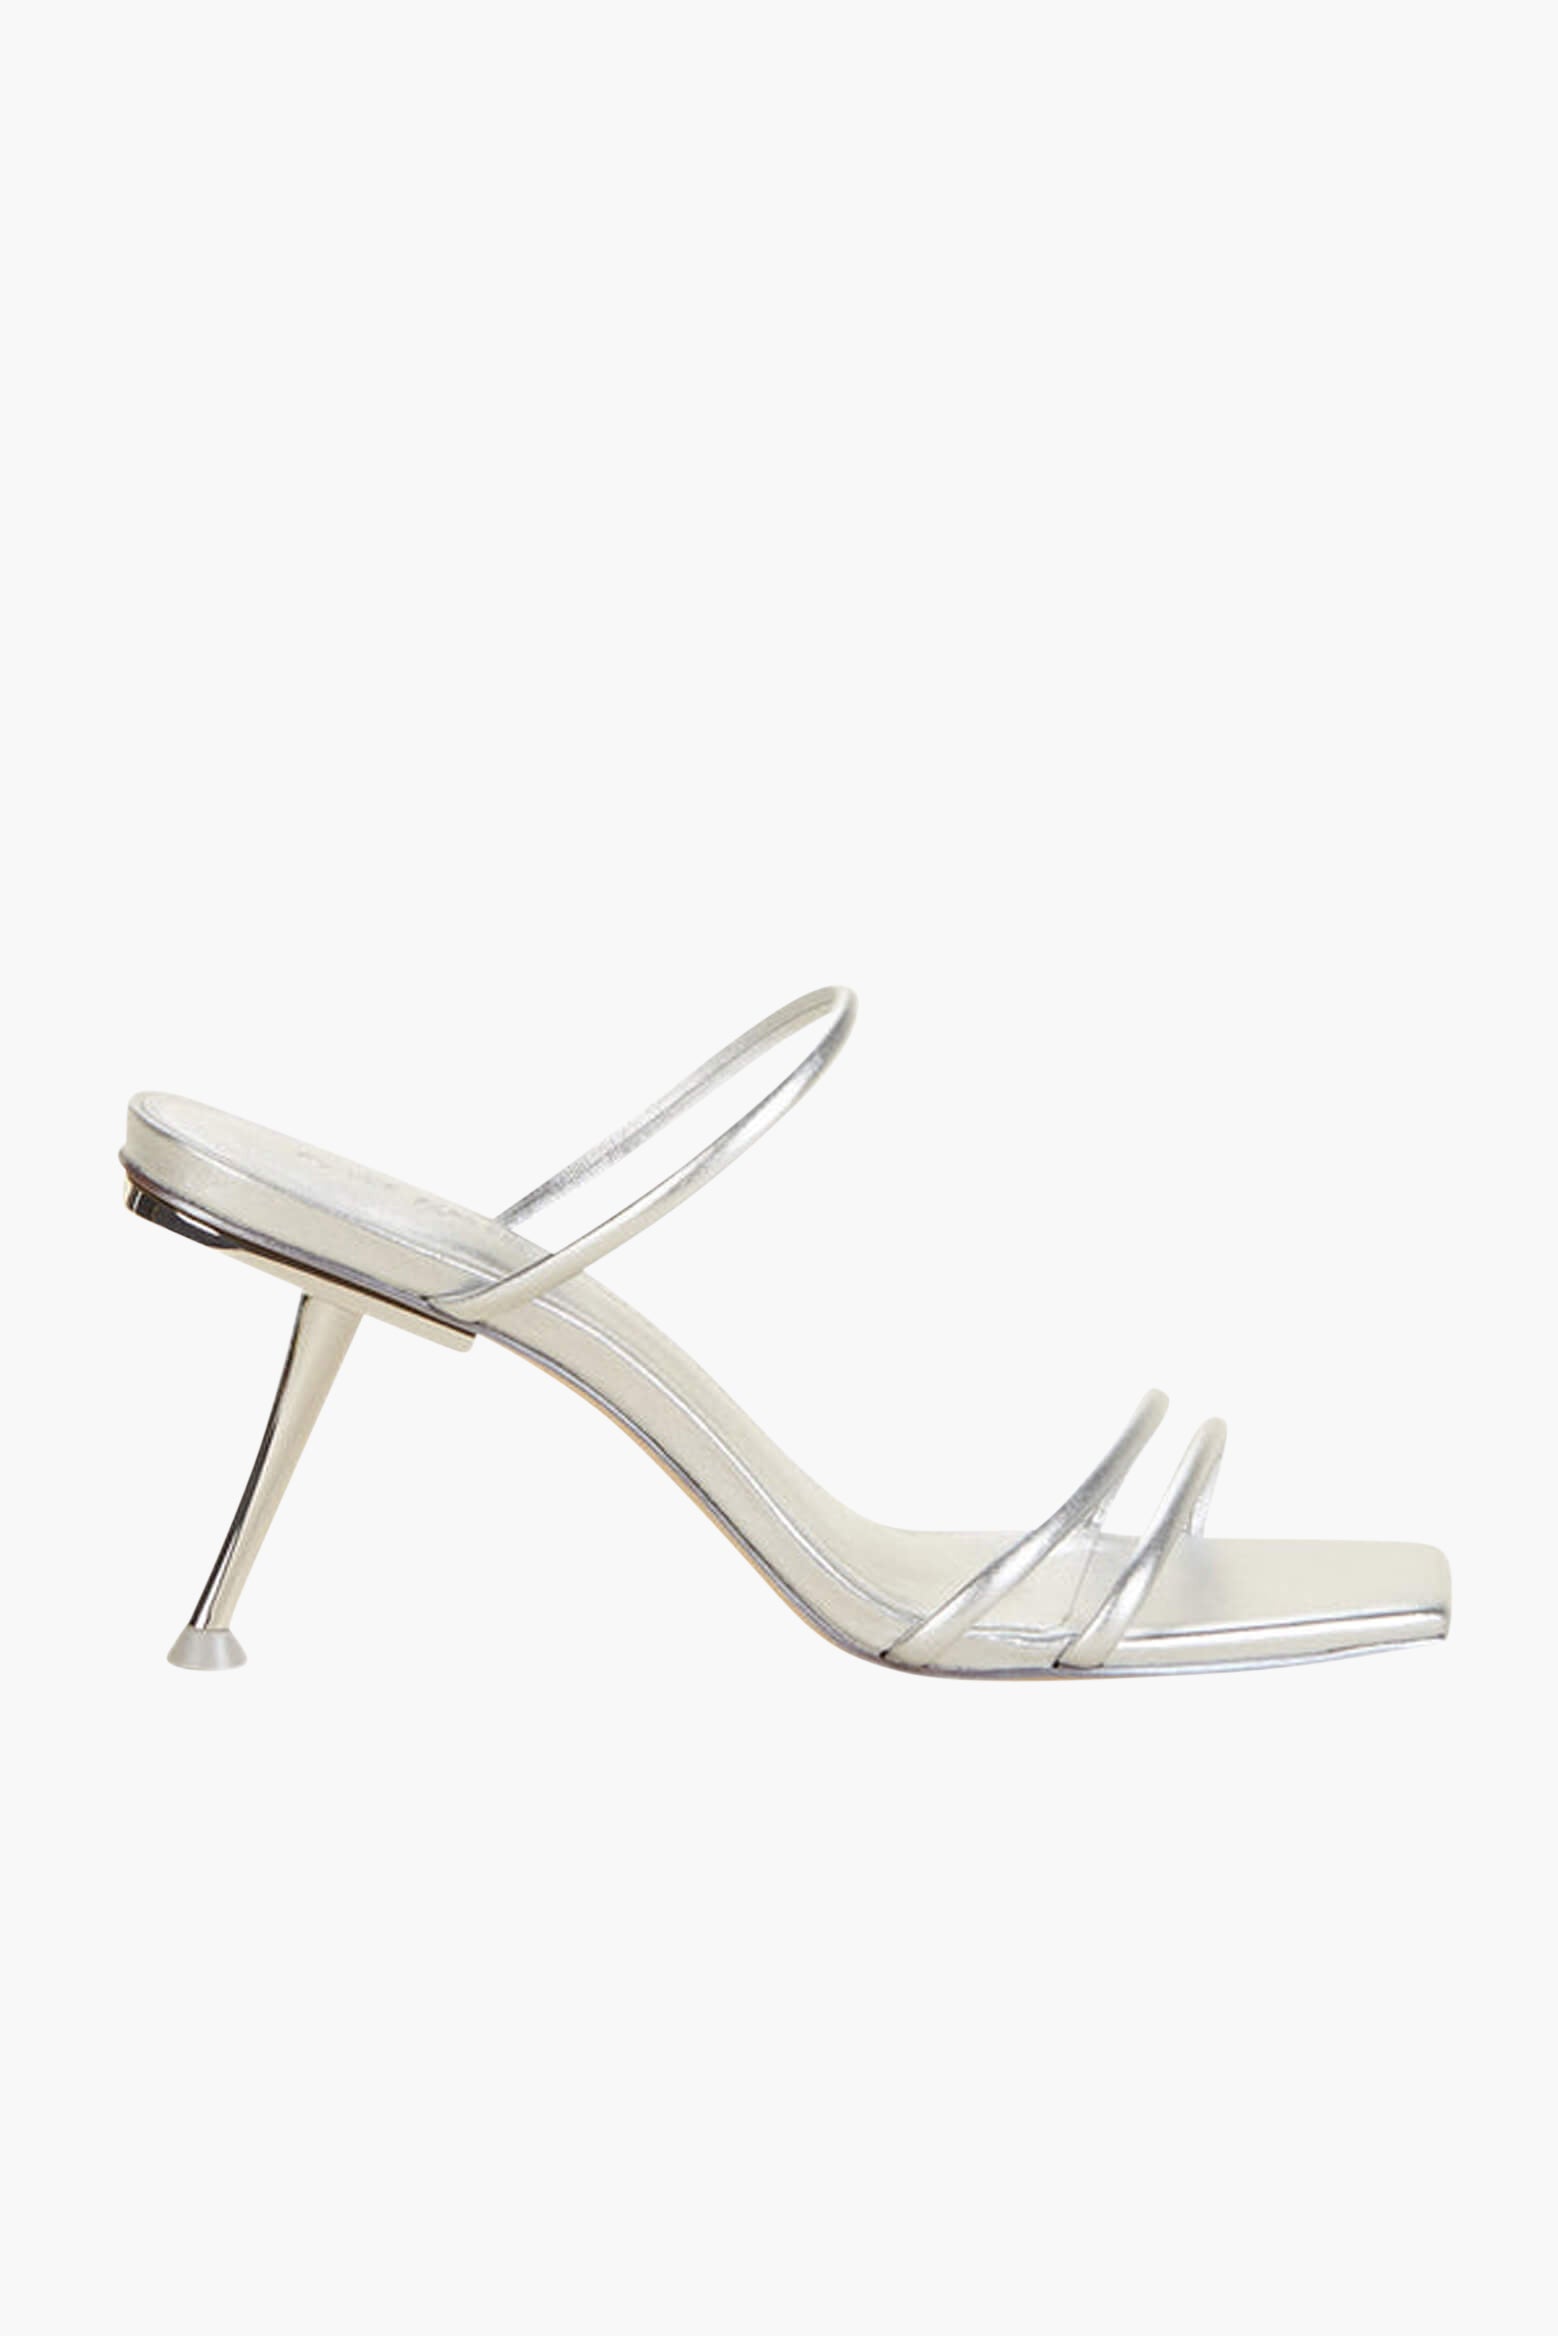 Cult Gaia Lydia Sandal in Silver available at TNT The New Trend Australia.